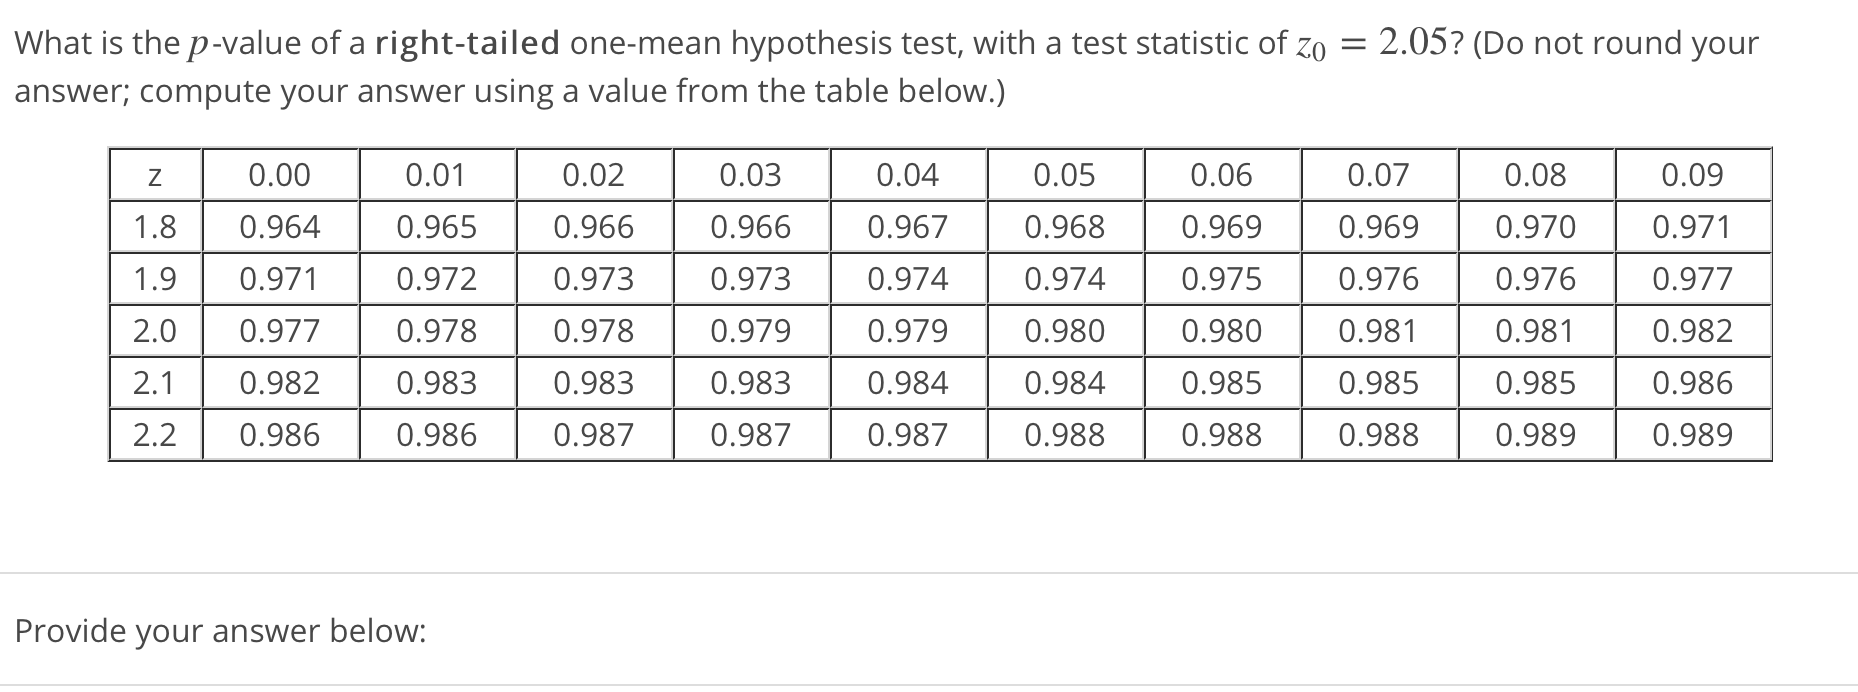 What is the p-value of a right-tailed one-mean hypothesis test, with a test statistic of zo
answer; compute your answer using a value from the table below.)
2.05? (Do not round your
0.00
1.8 0.964
1.90.971
2.0 0.977
2.10.982
2.20.986
0.01
0.965
0.972
0.978
0.983
0.986
0.02
0.966
0.973
0.978
0.983
0.987
0.03
0.966
0.973
0.979
0.983
0.987
0.04
0.967
0.974
0.979
0.984
0.987
0.05
0.968
0.974
0.980
0.984
0.988
0.06
0.969
0.975
0.980
0.985
0.988
0.07
0.969
0.976
0.981
0.985
0.988
0.08
0.970
0.976
0.981
0.985
0.989
0.09
0.971
0 977
0.982
0.986
0.989
Provide your answer below
